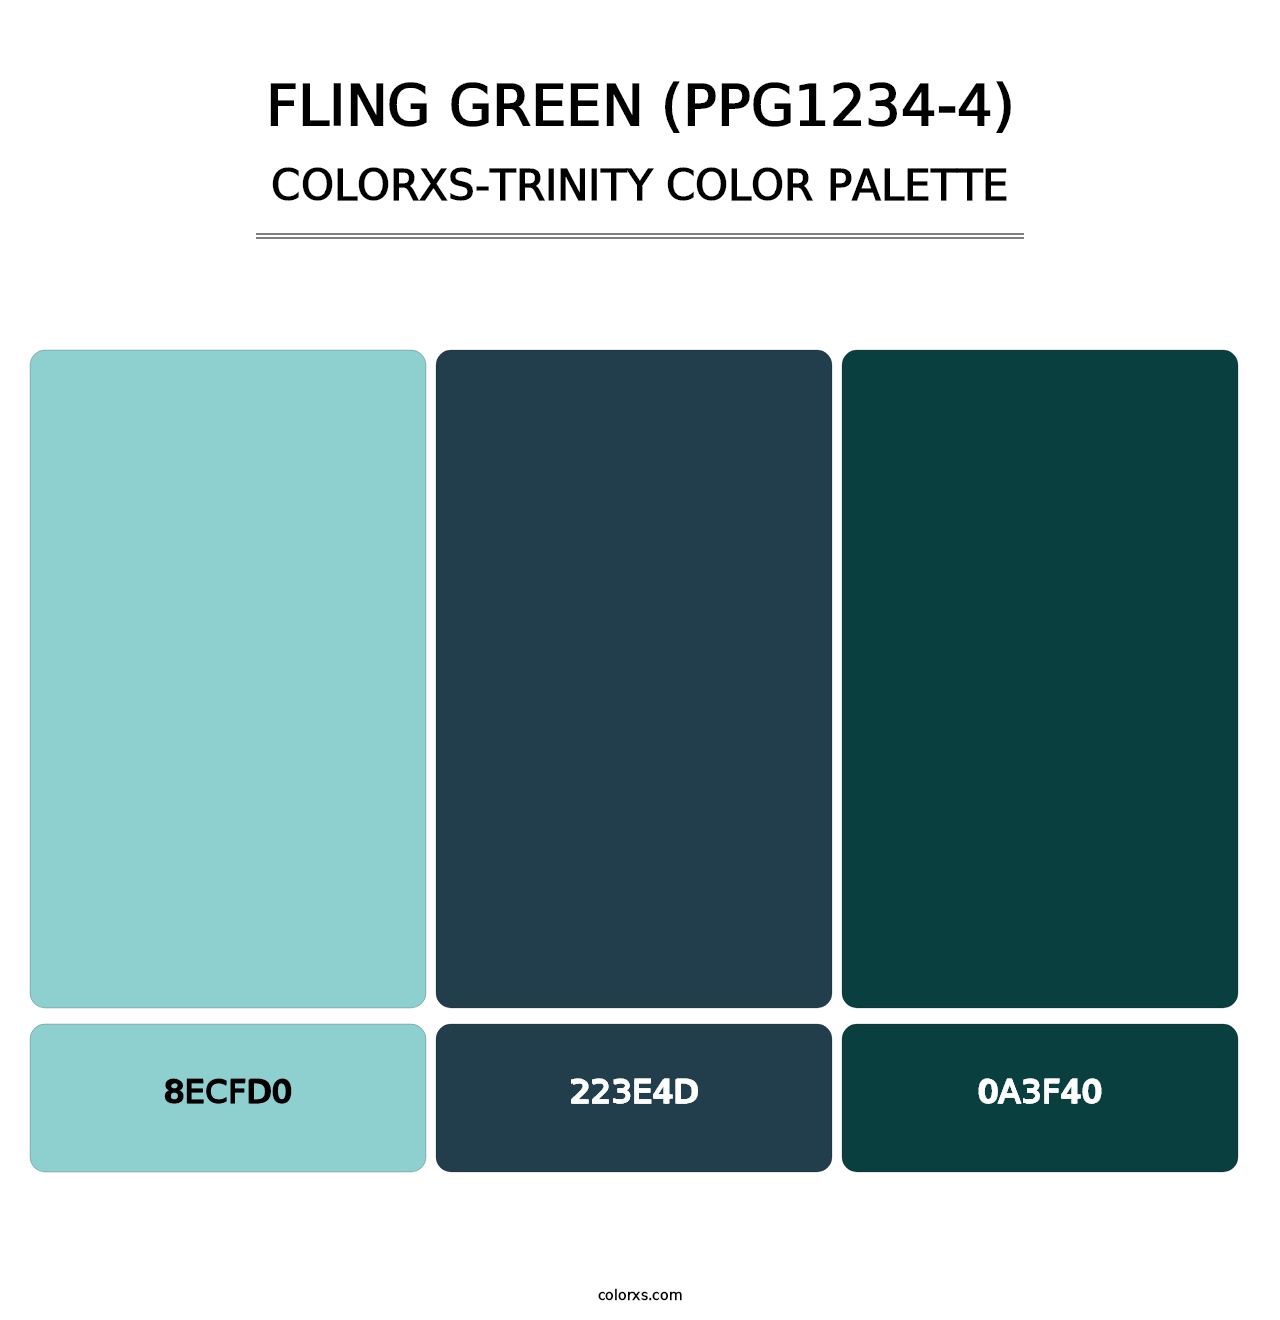 Fling Green (PPG1234-4) - Colorxs Trinity Palette